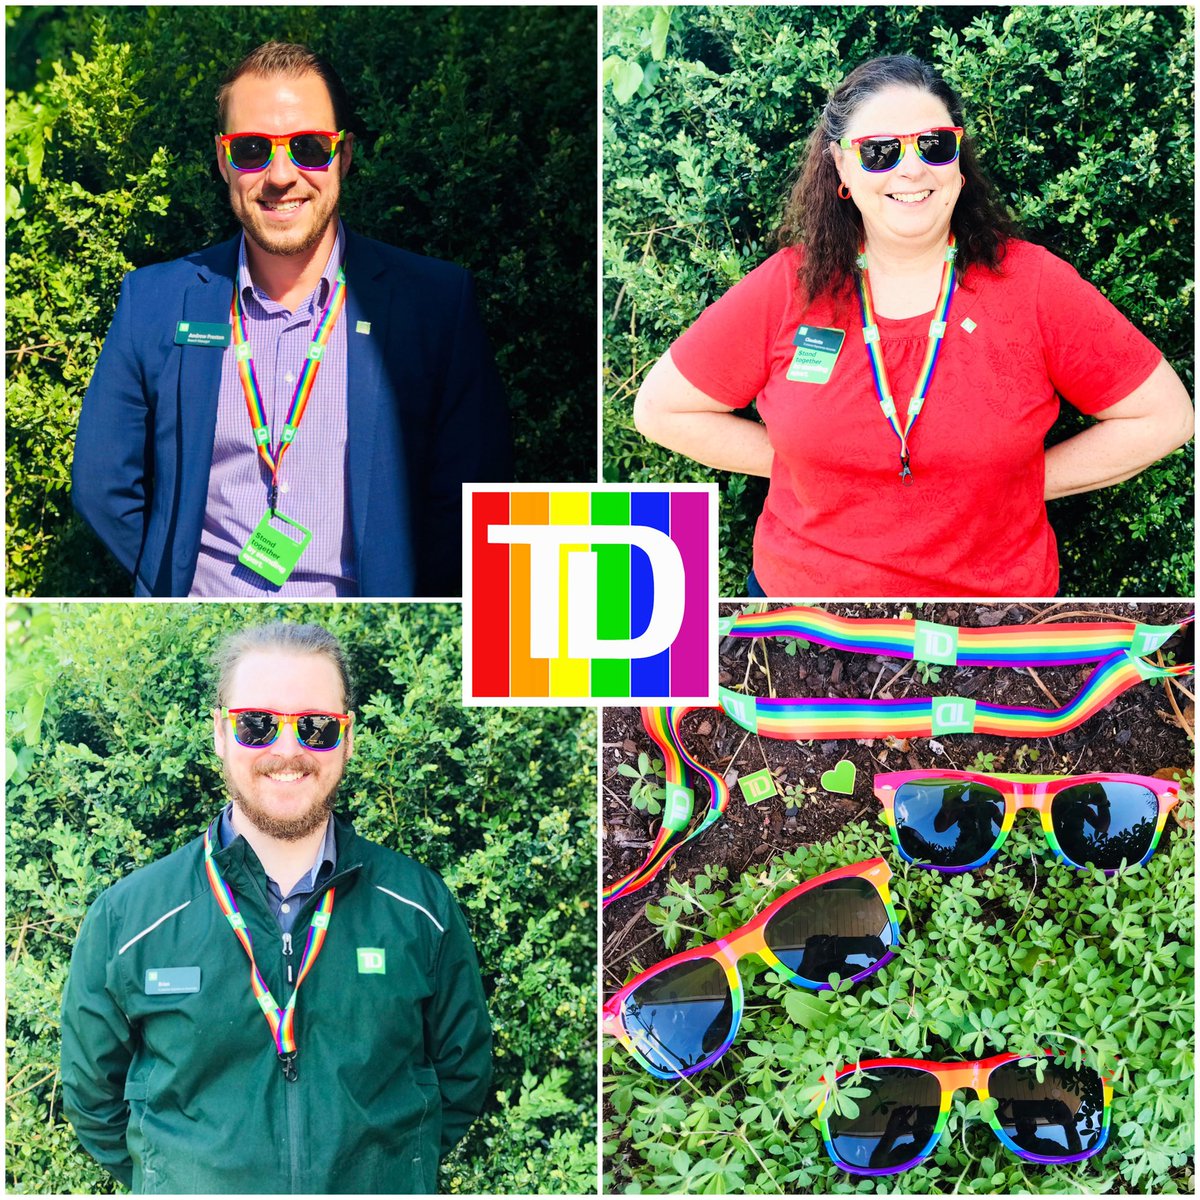 Happy Pride Day from our @TD_Canada  Bedford Team !  #Foreverproud #CPBPrideDay #TheReadycommitment ❤️🧡💛💚💙💜#ToujoursFiers 🌈 @marlarsmith @carlalynnesala  @AnnJMacKenzie @AndyDixon_TD @oiclet @StephTennant26 @olliver_td @mariomvuotto @steveyms @GrantMinish_ME